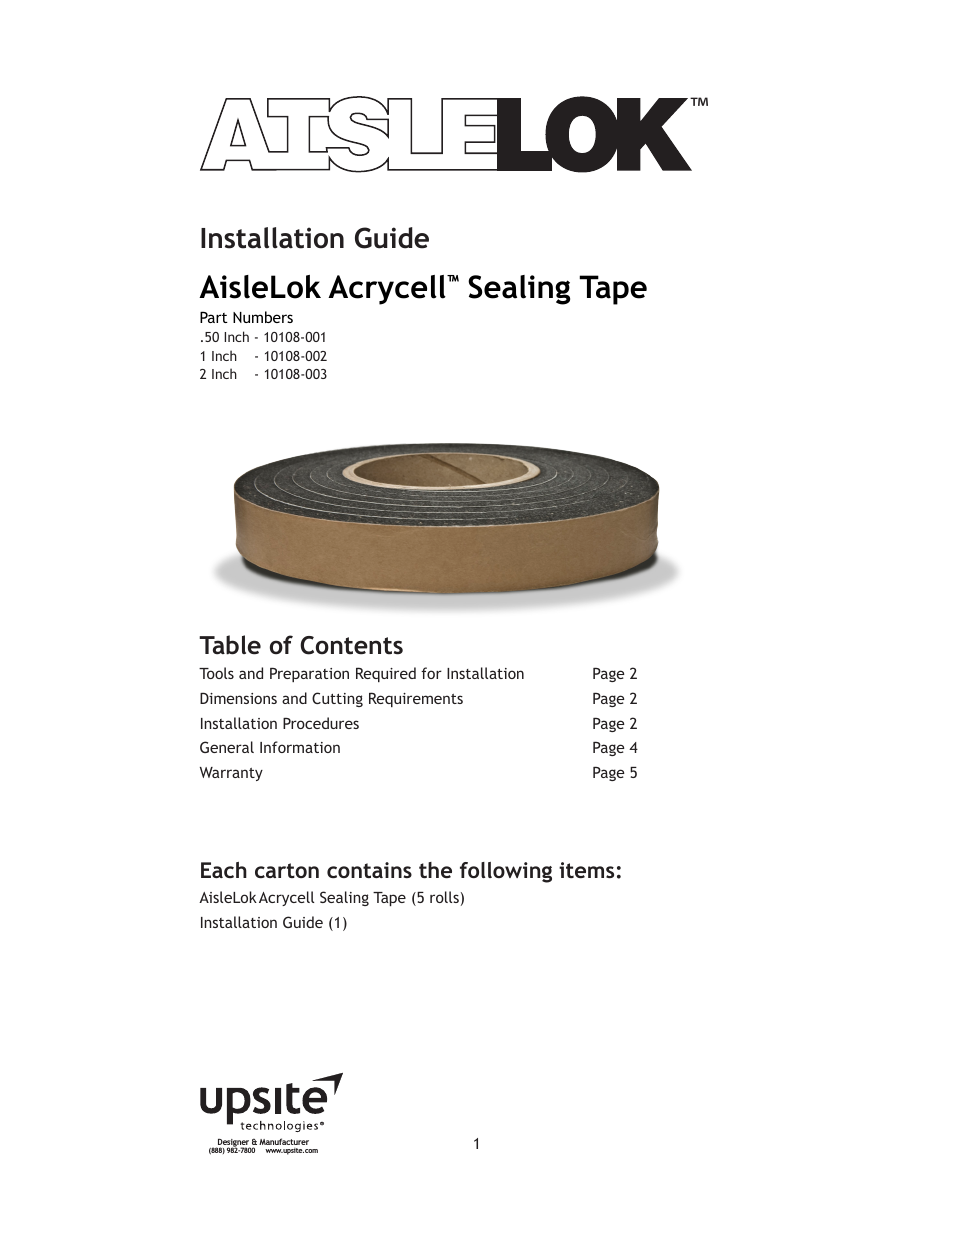 10108-003 Acrycell Sealing Tape